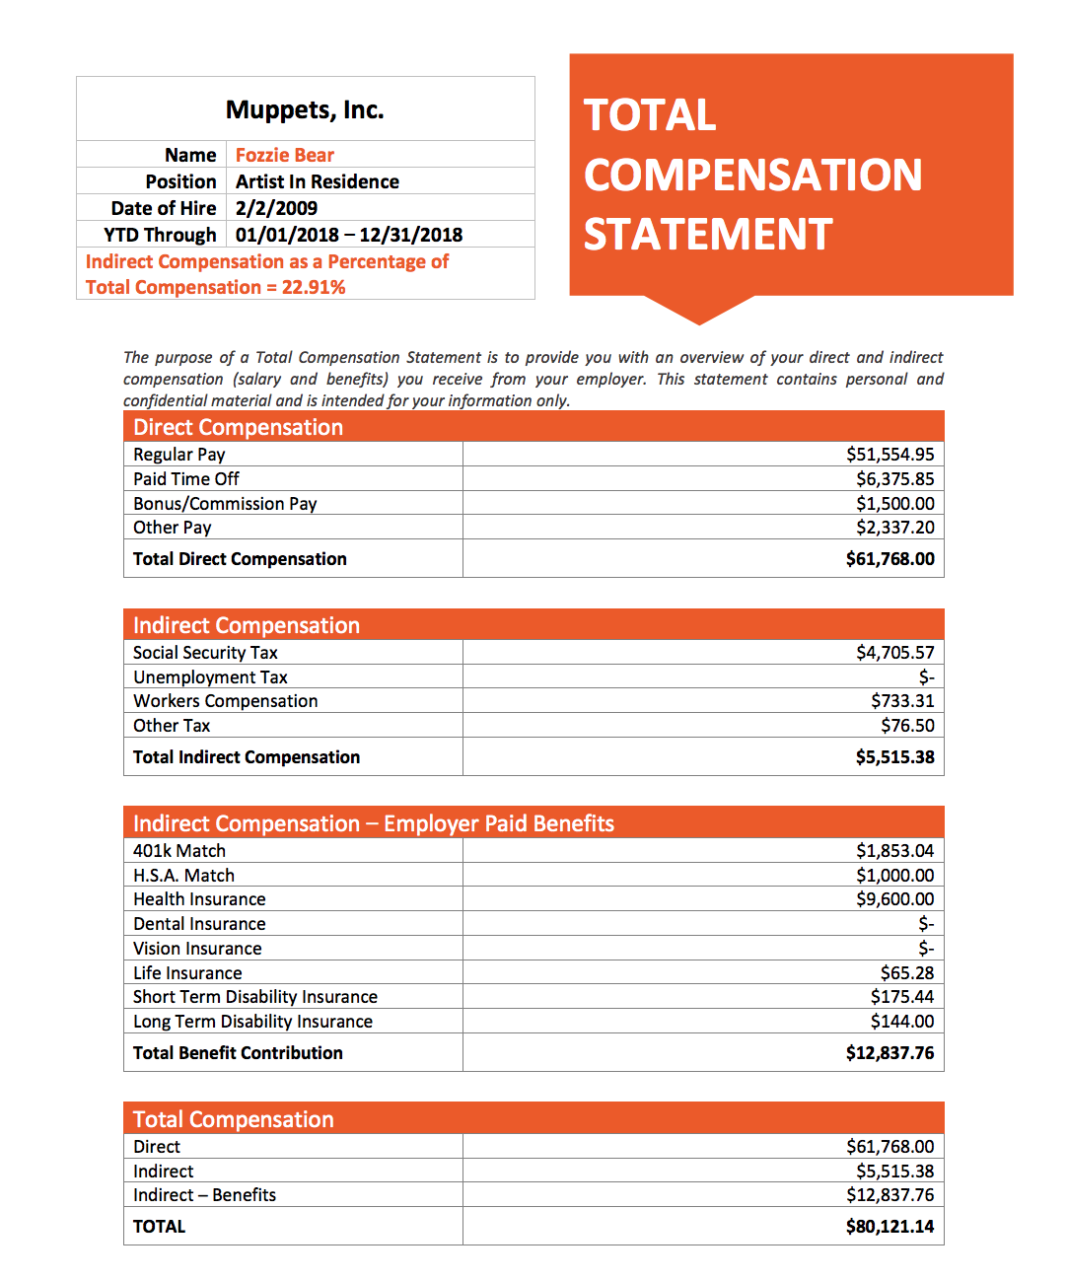 What is a total compensation statement & how does it provide value